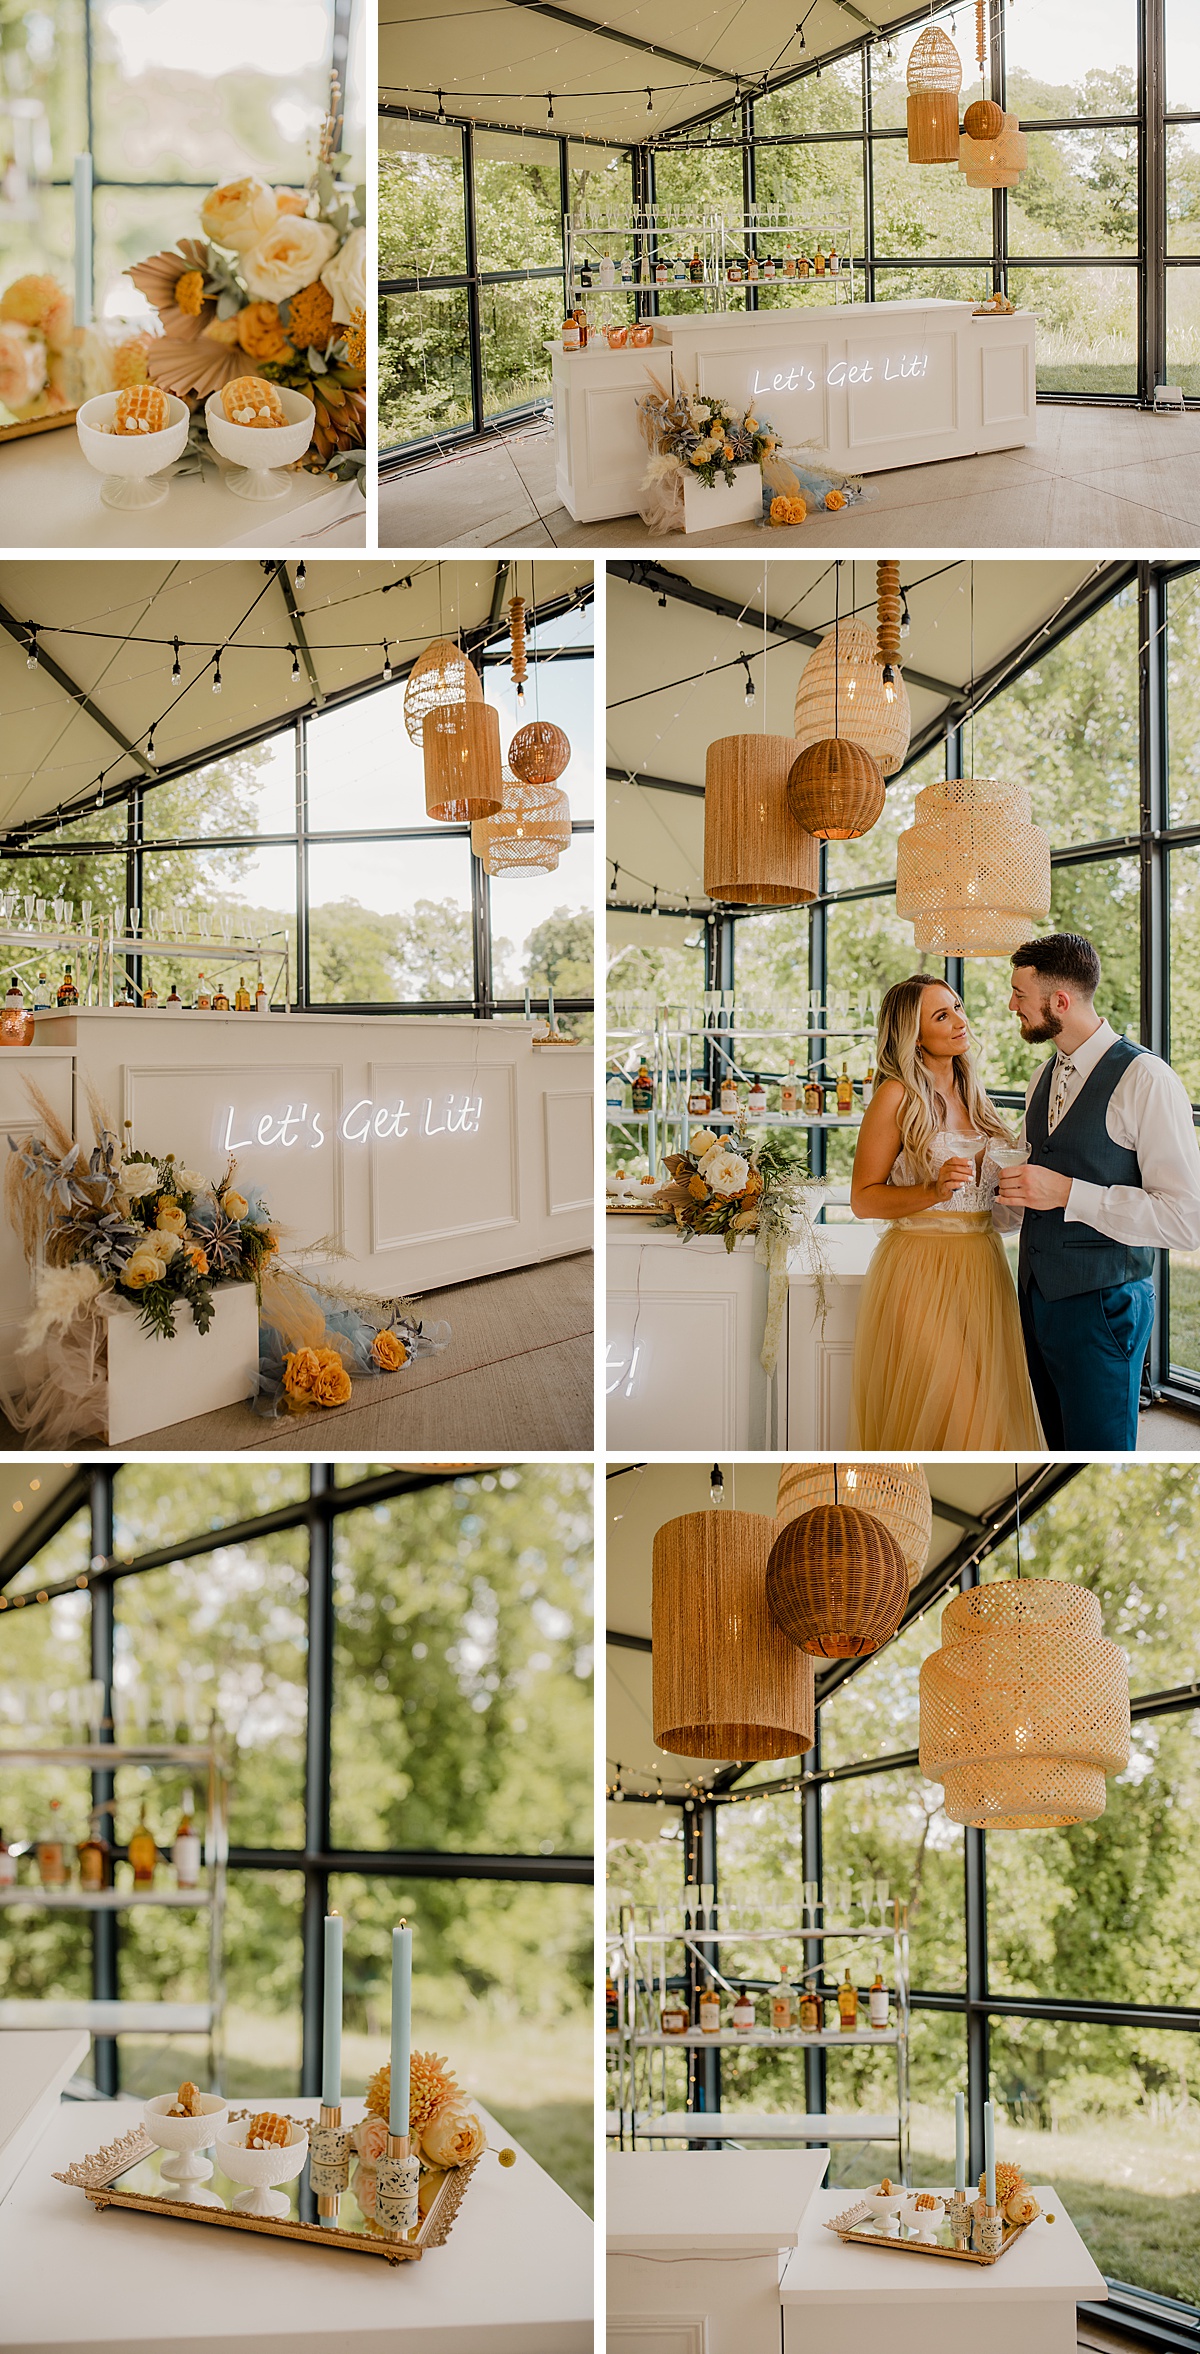 Colorful boho wedding bar and dessert table inspiration from this styled branding shoot in Kansas City.